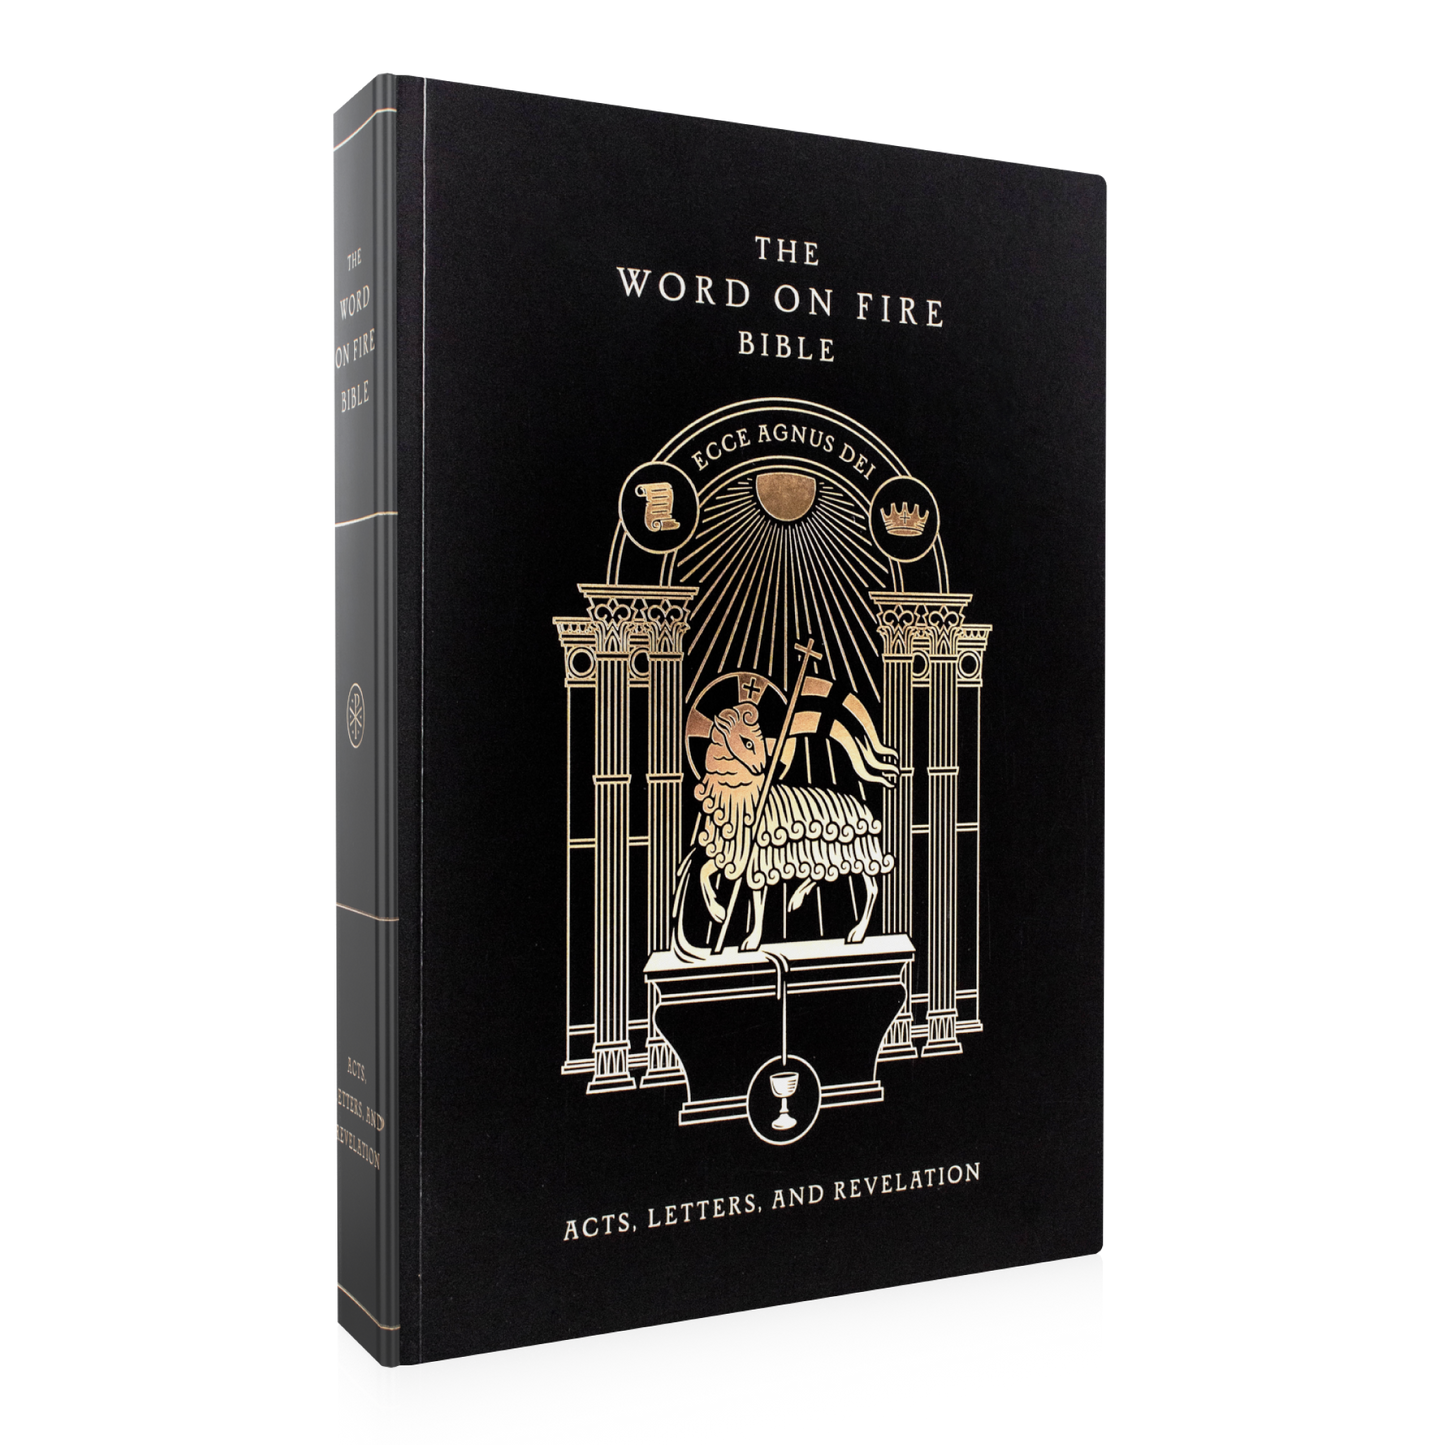 The Word on Fire Bible (Volume II): Acts, Letters and Revelation